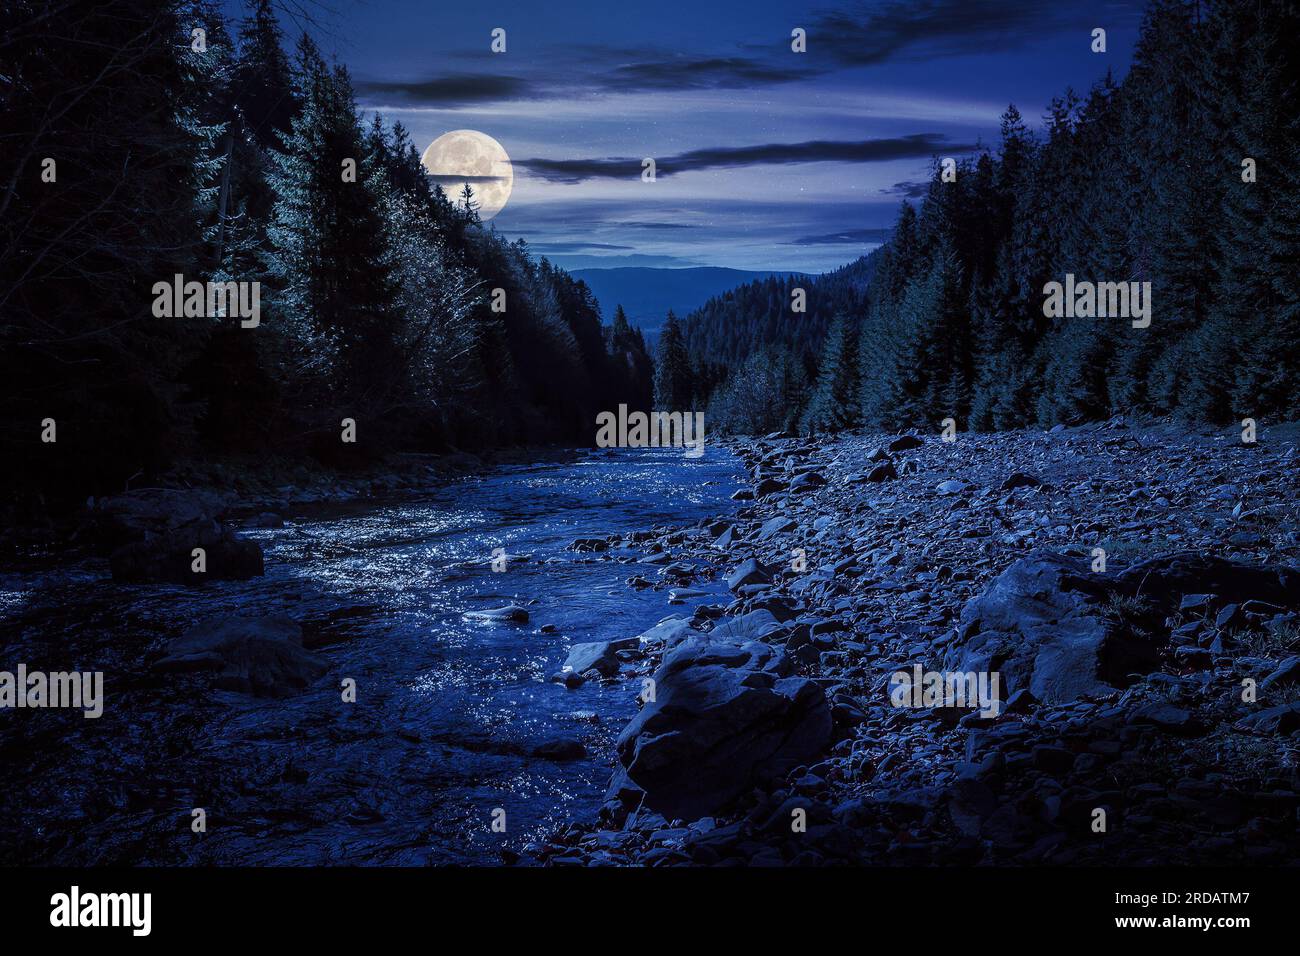 autumn landscape at night. rocky shore of the river that flows near the pine forest at the foot of the mountain in full moon light Stock Photo